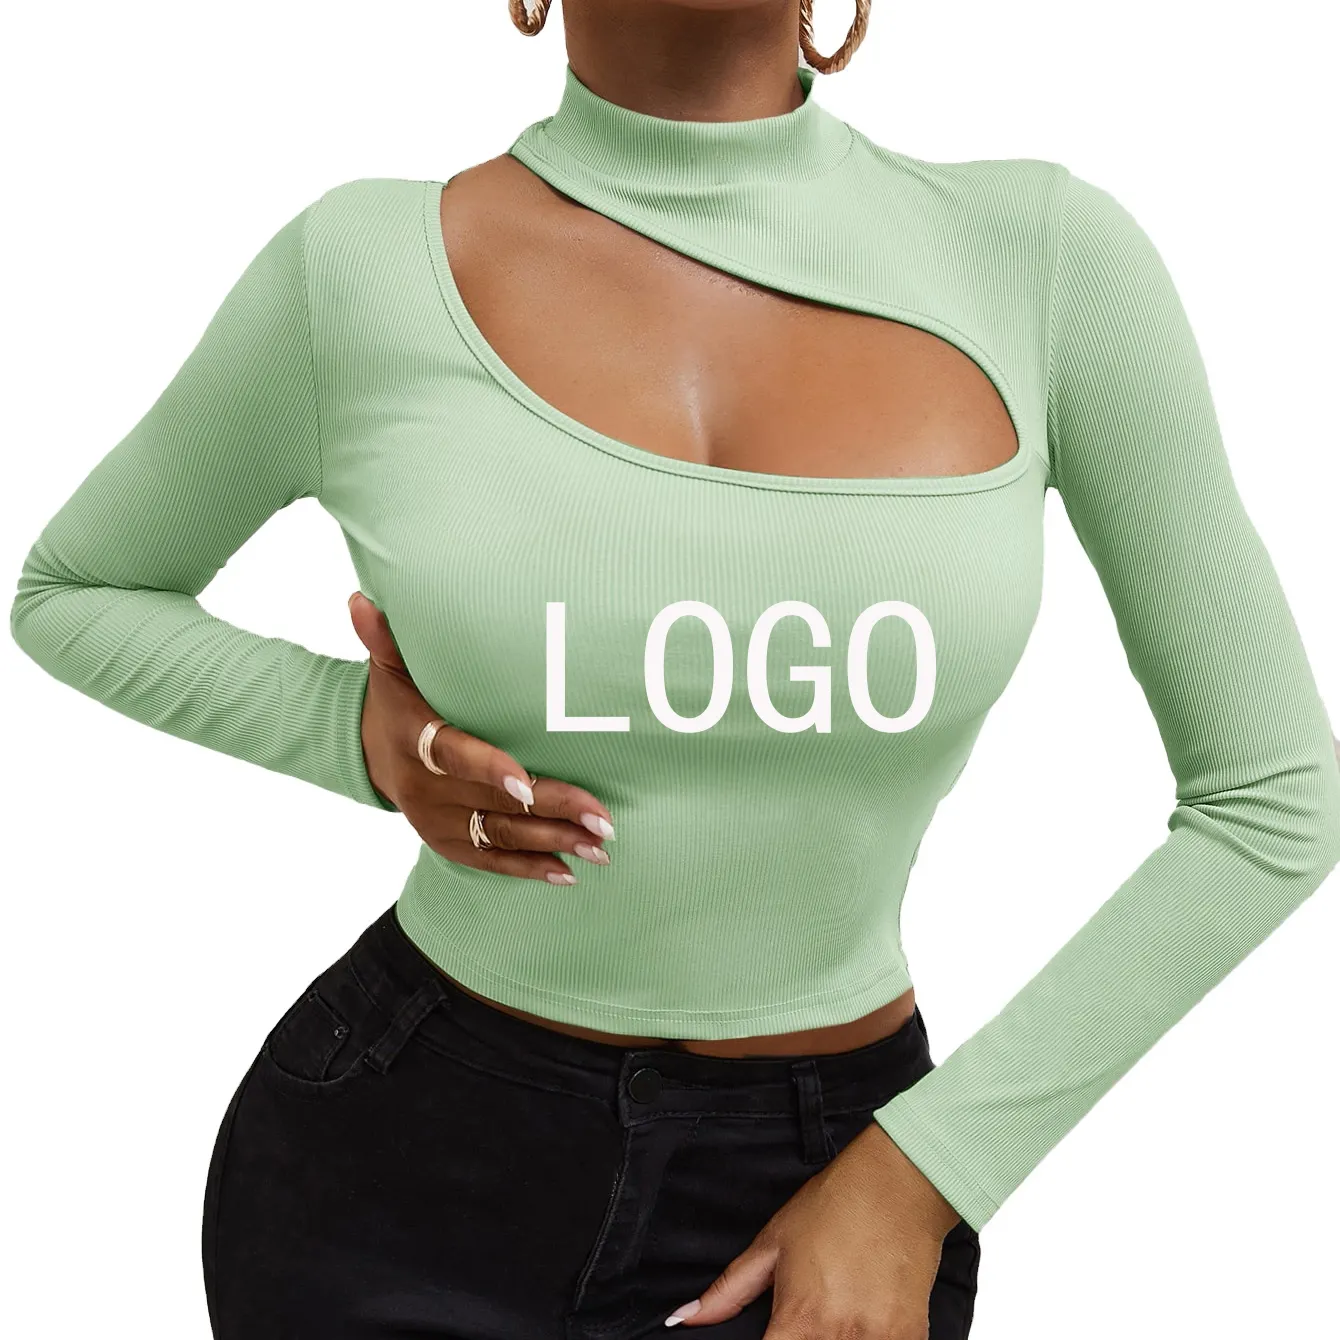 Silk screen printing knitted women's blouses Cut Out shirts crop tops tee T-shirts plain knitted top